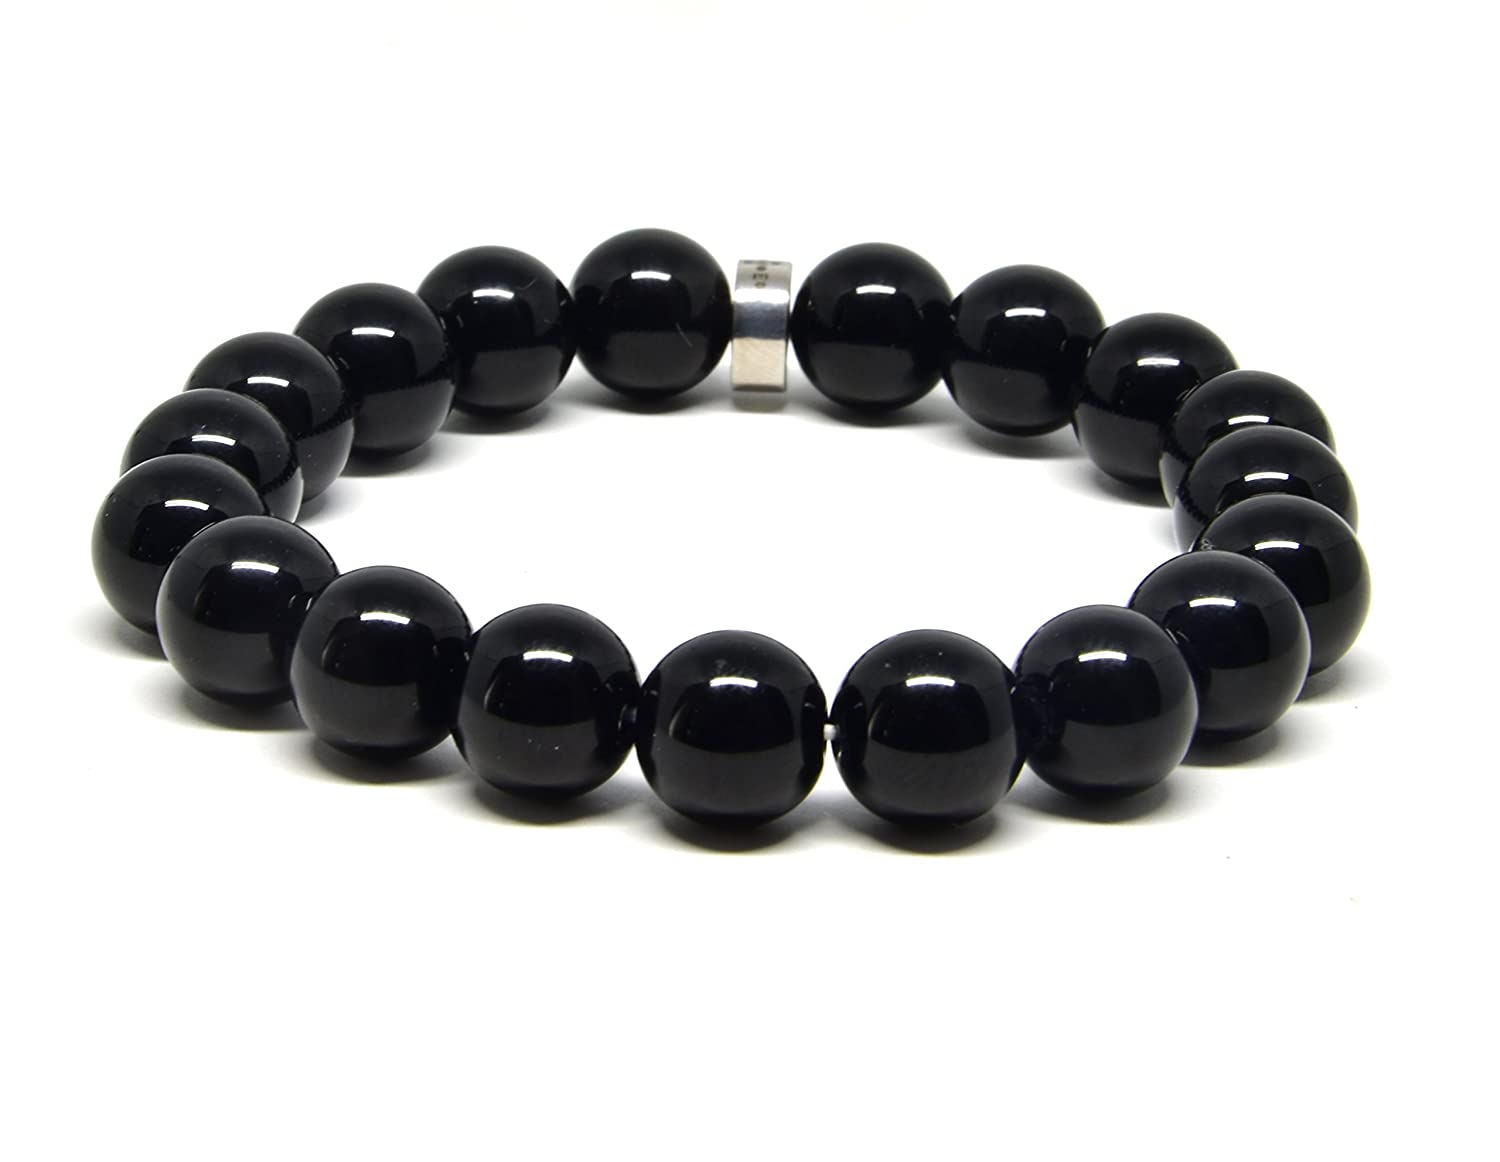 Black Jade Meanings, Properties and Uses - CrystalStones.com